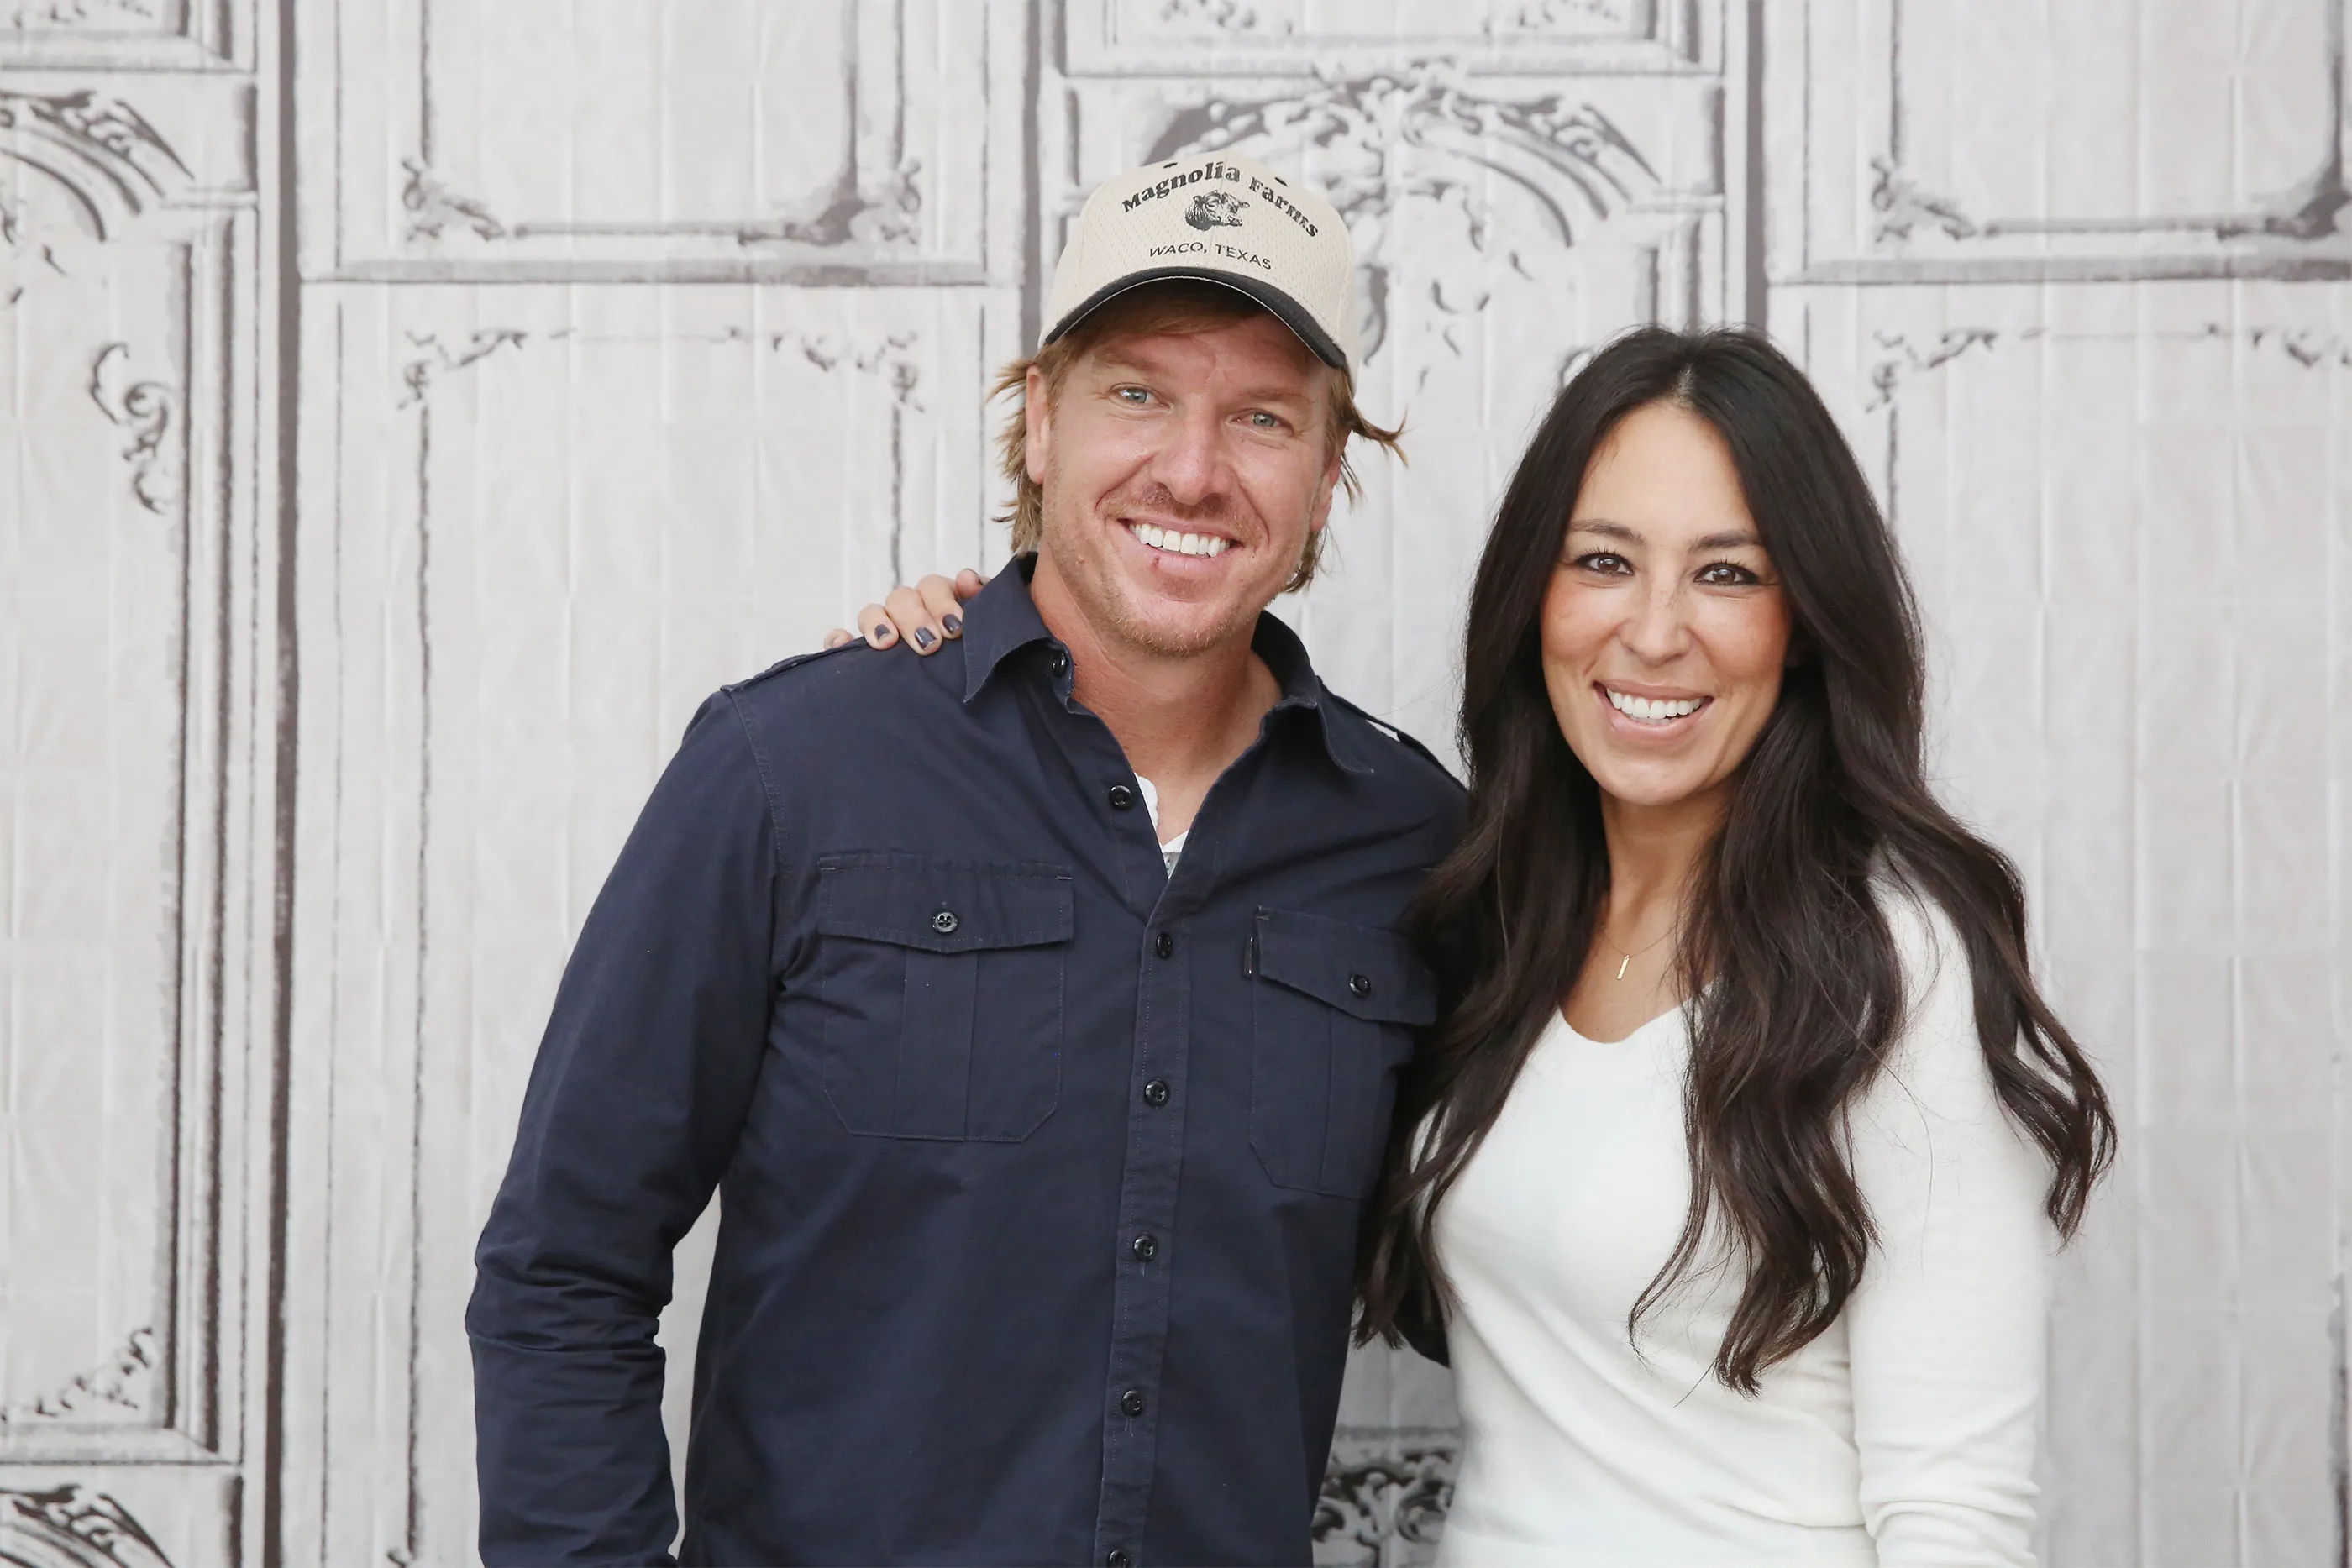 Chip and Joanna Gaines: How the Fixer Upper Stars Started